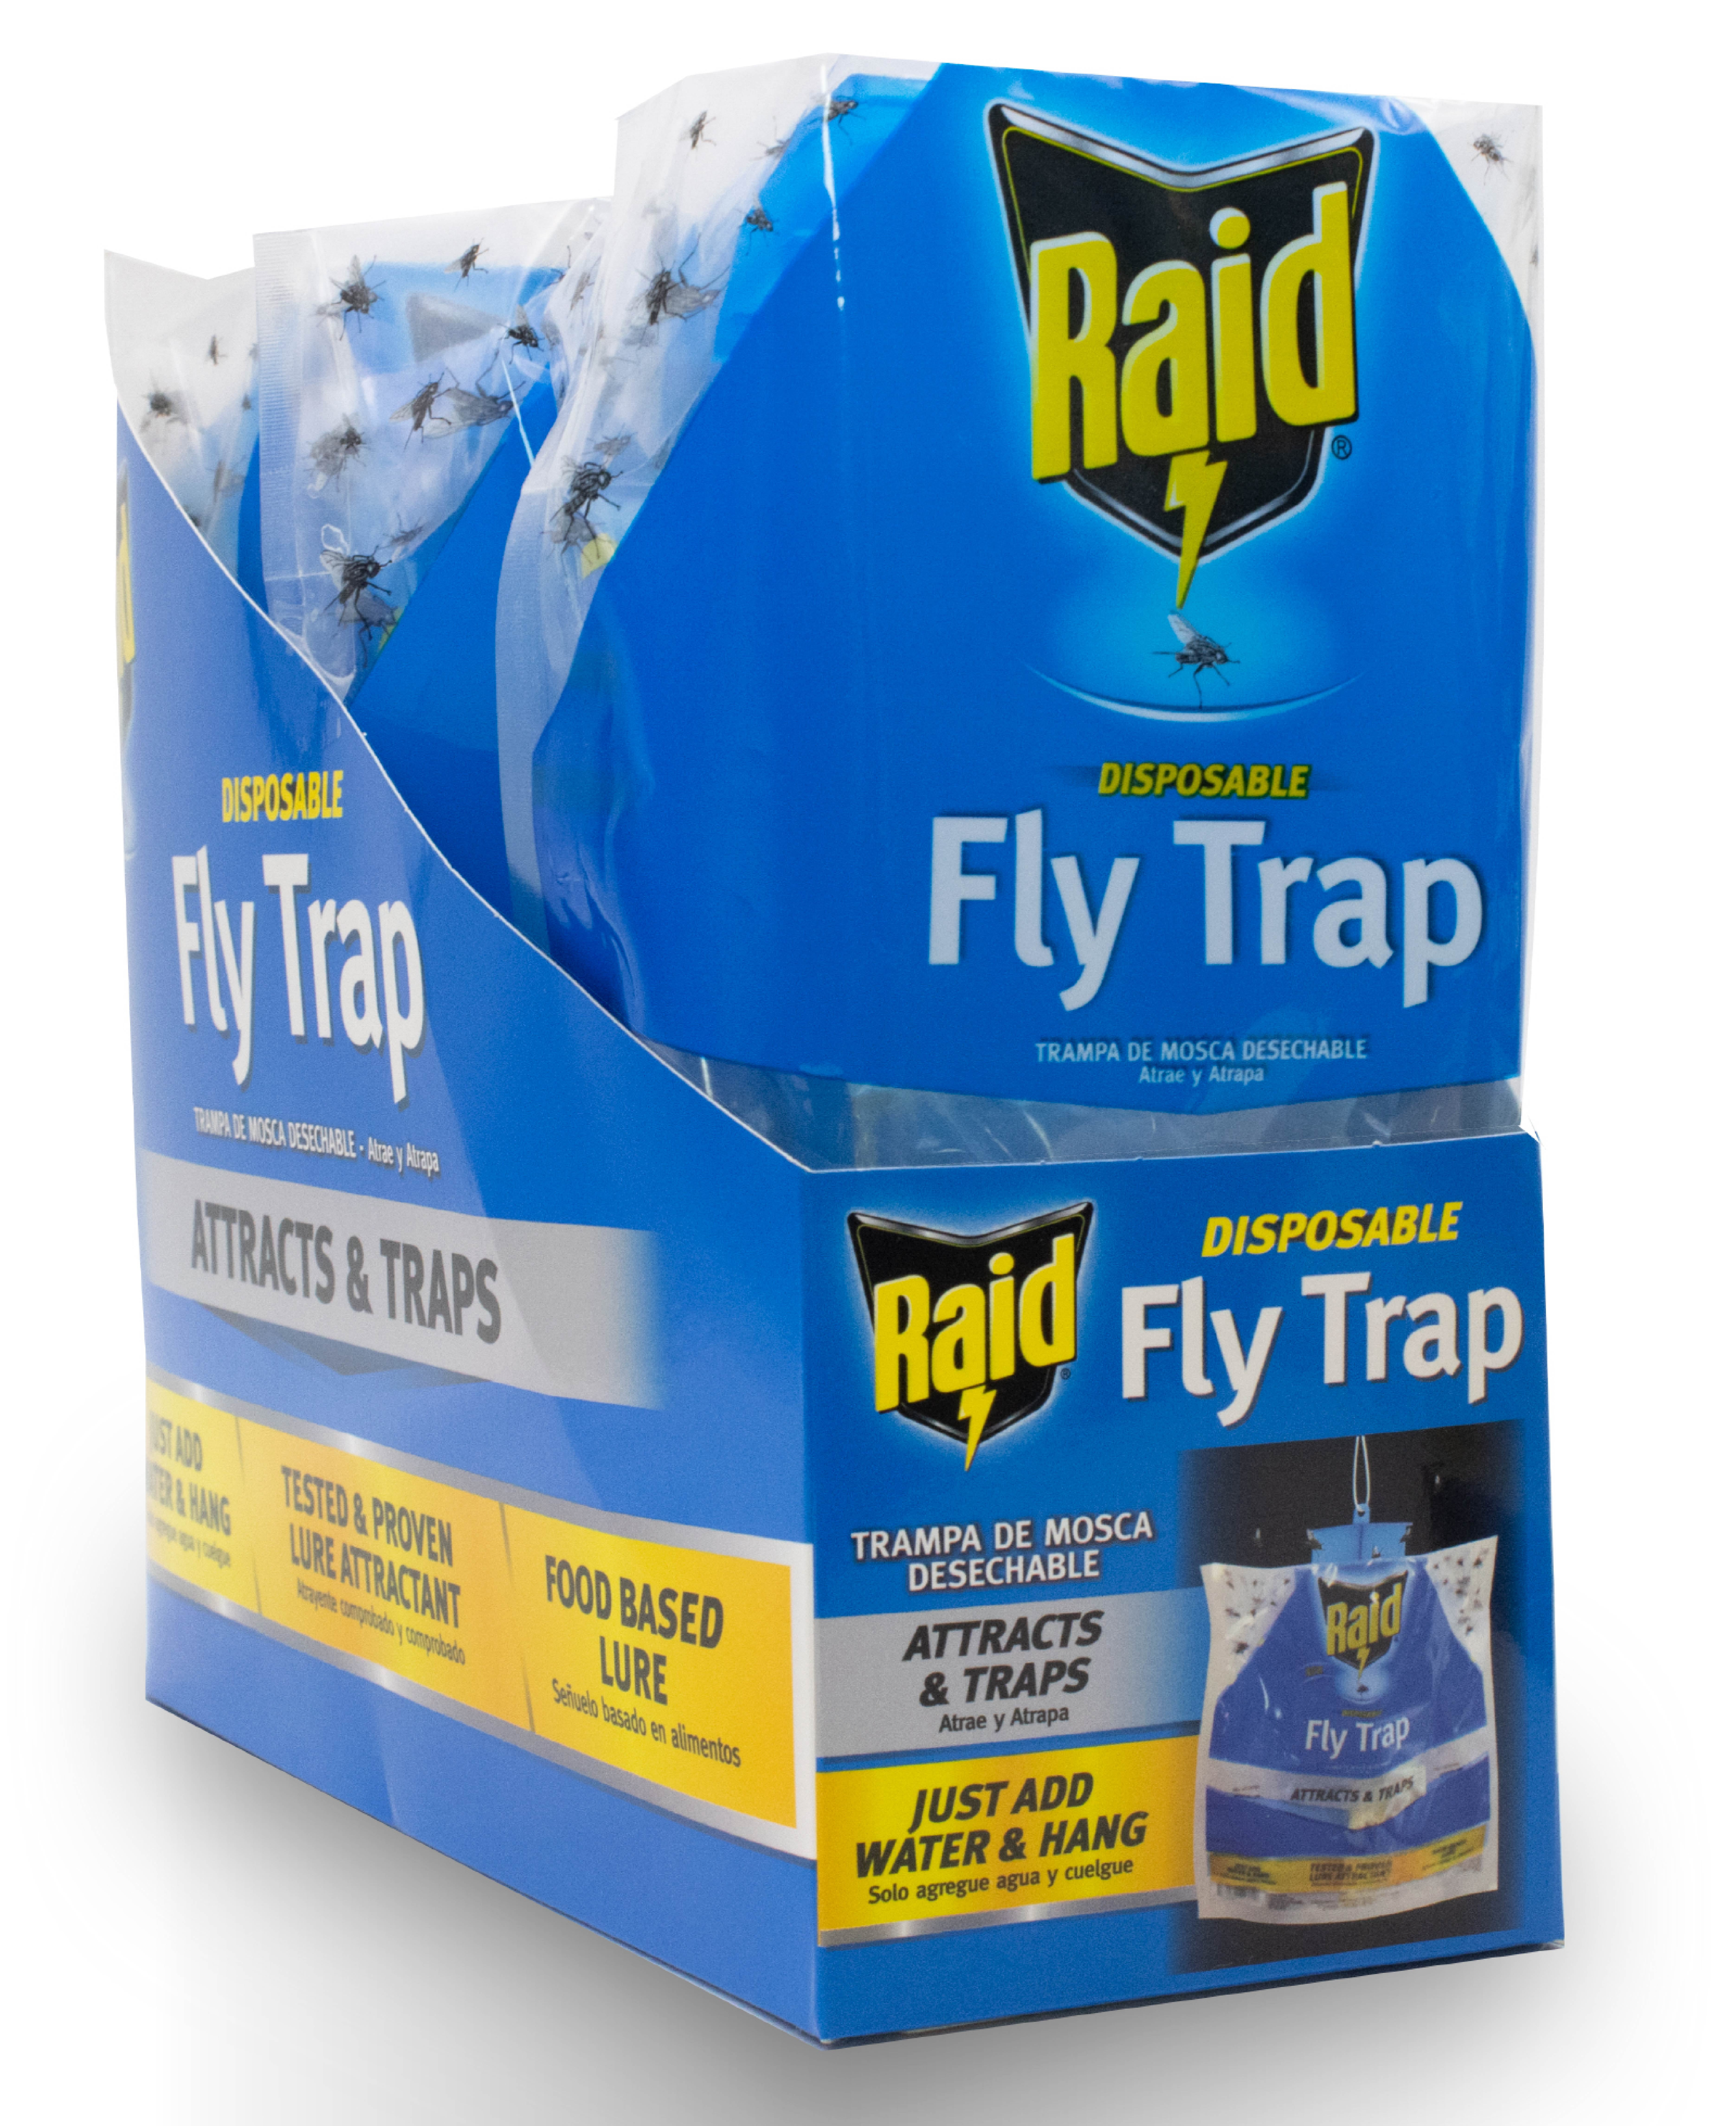 Amazon.com : Raid Fly Trap (6-Pack), Outdoor Fly Trap, Disposable Fly Trap  Bag, House Fly Trap with Food-Based Attractant : Patio, Lawn & Garden